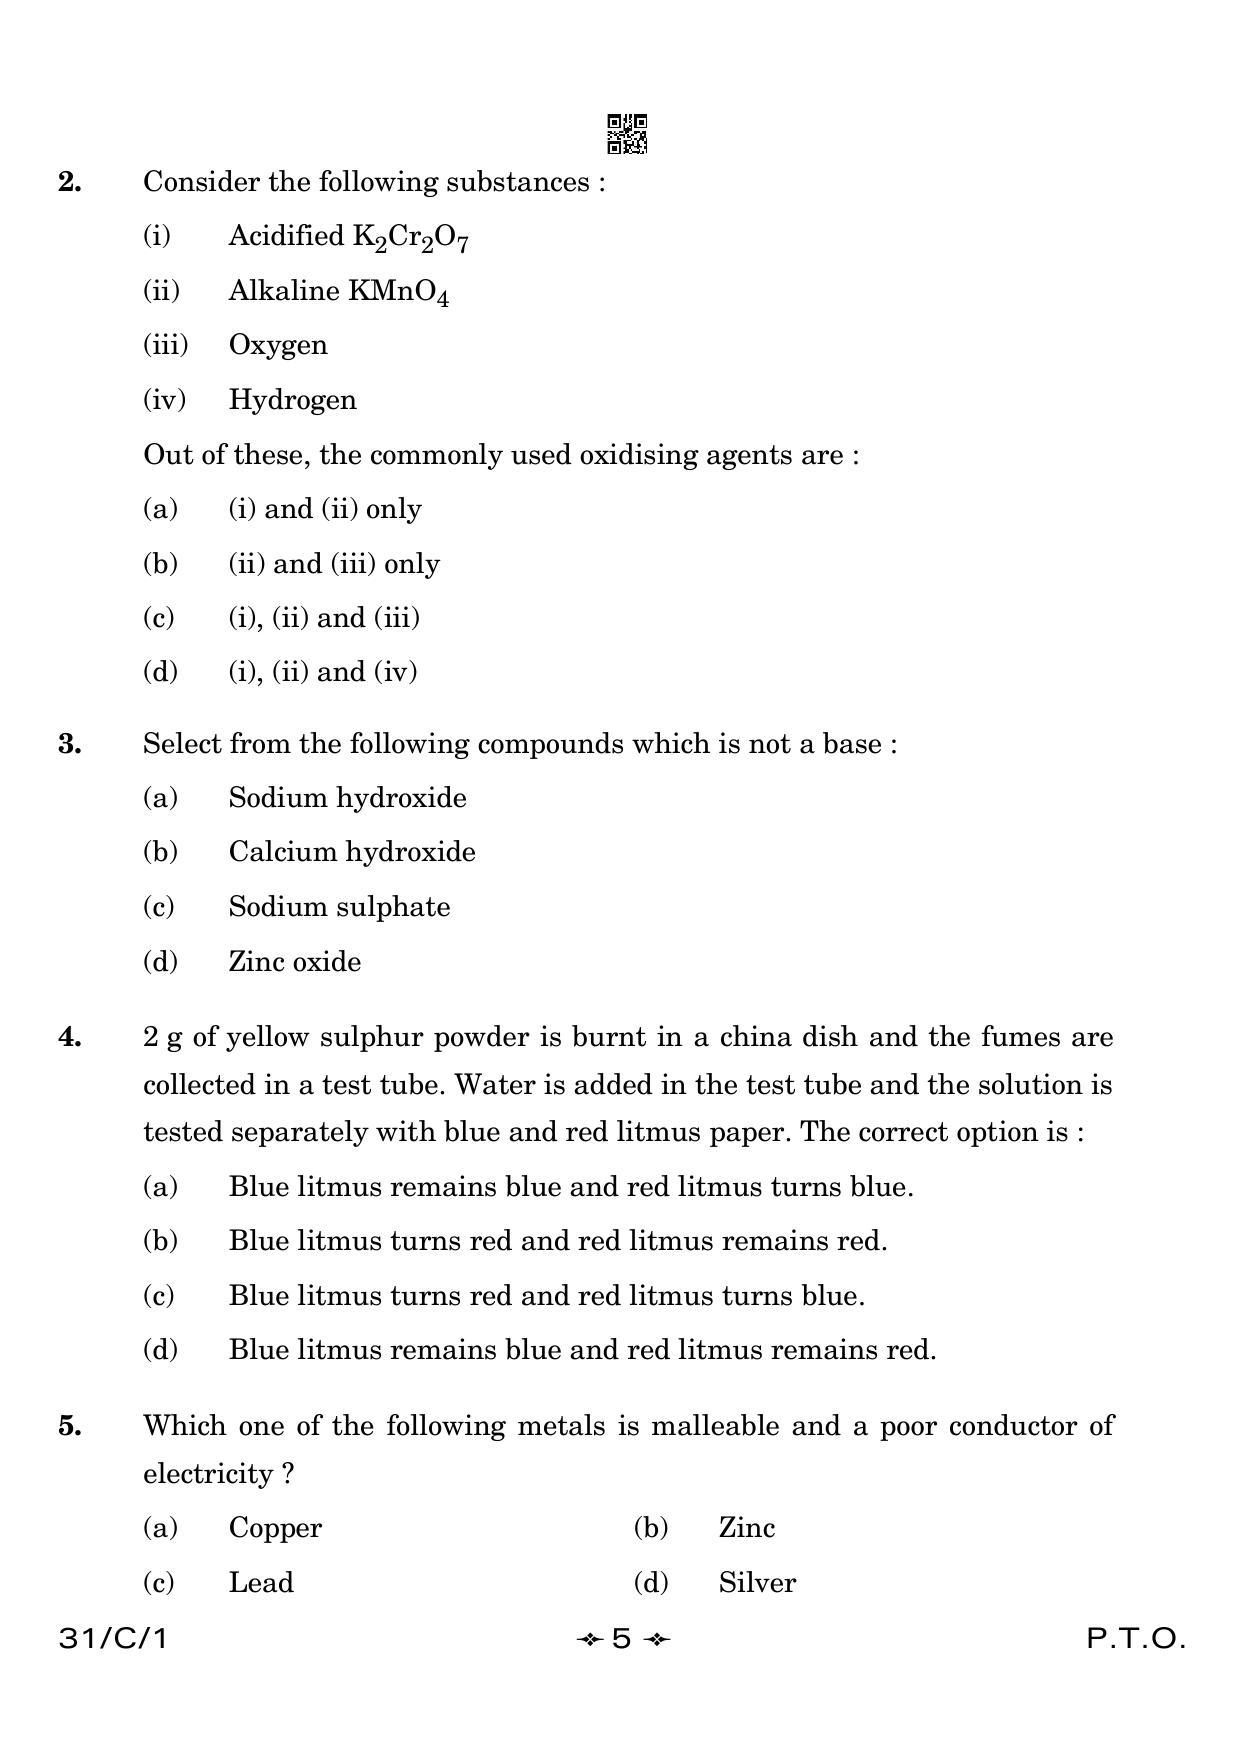 CBSE Class 10 31-1 Science 2023 (Compartment) Question Paper - Page 5